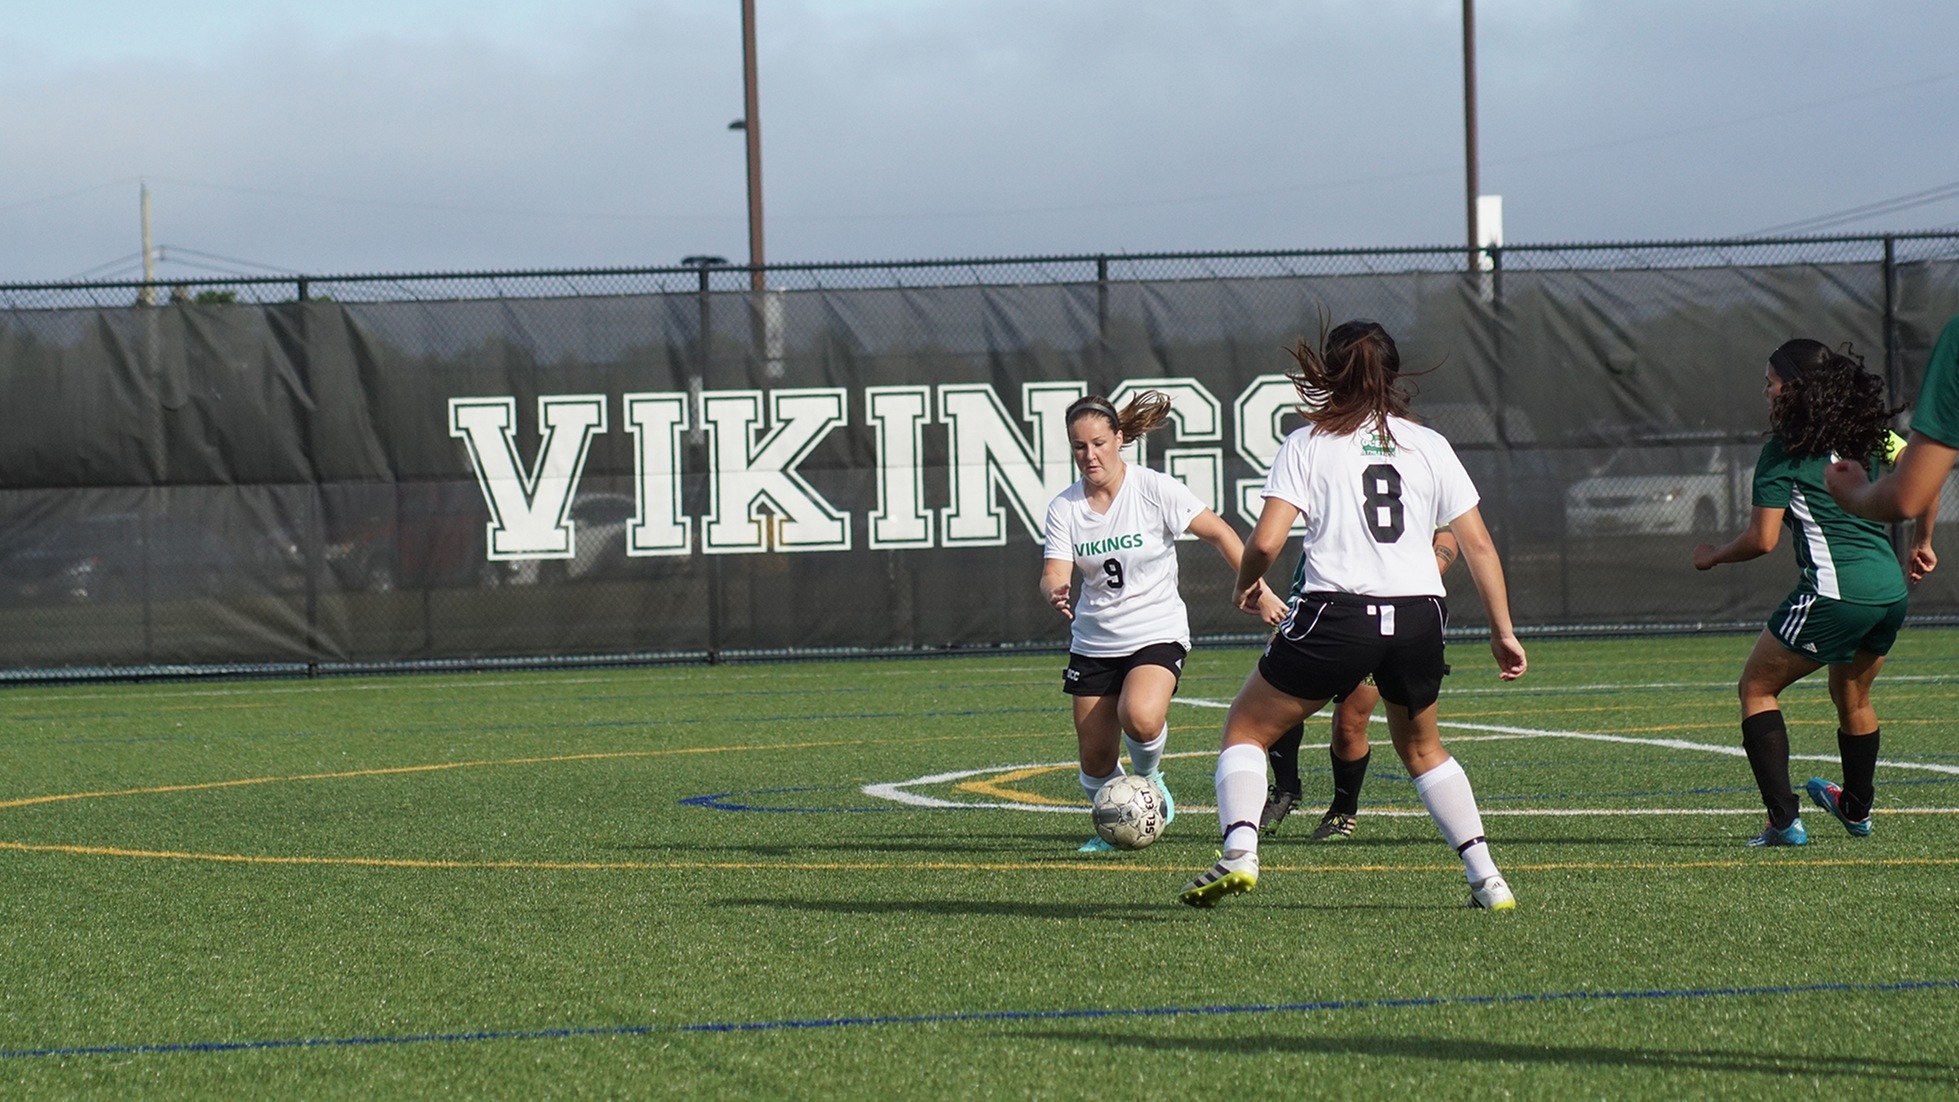 Adams with Two Goals as Vikings Fall to Middlesex in OT, 3-2